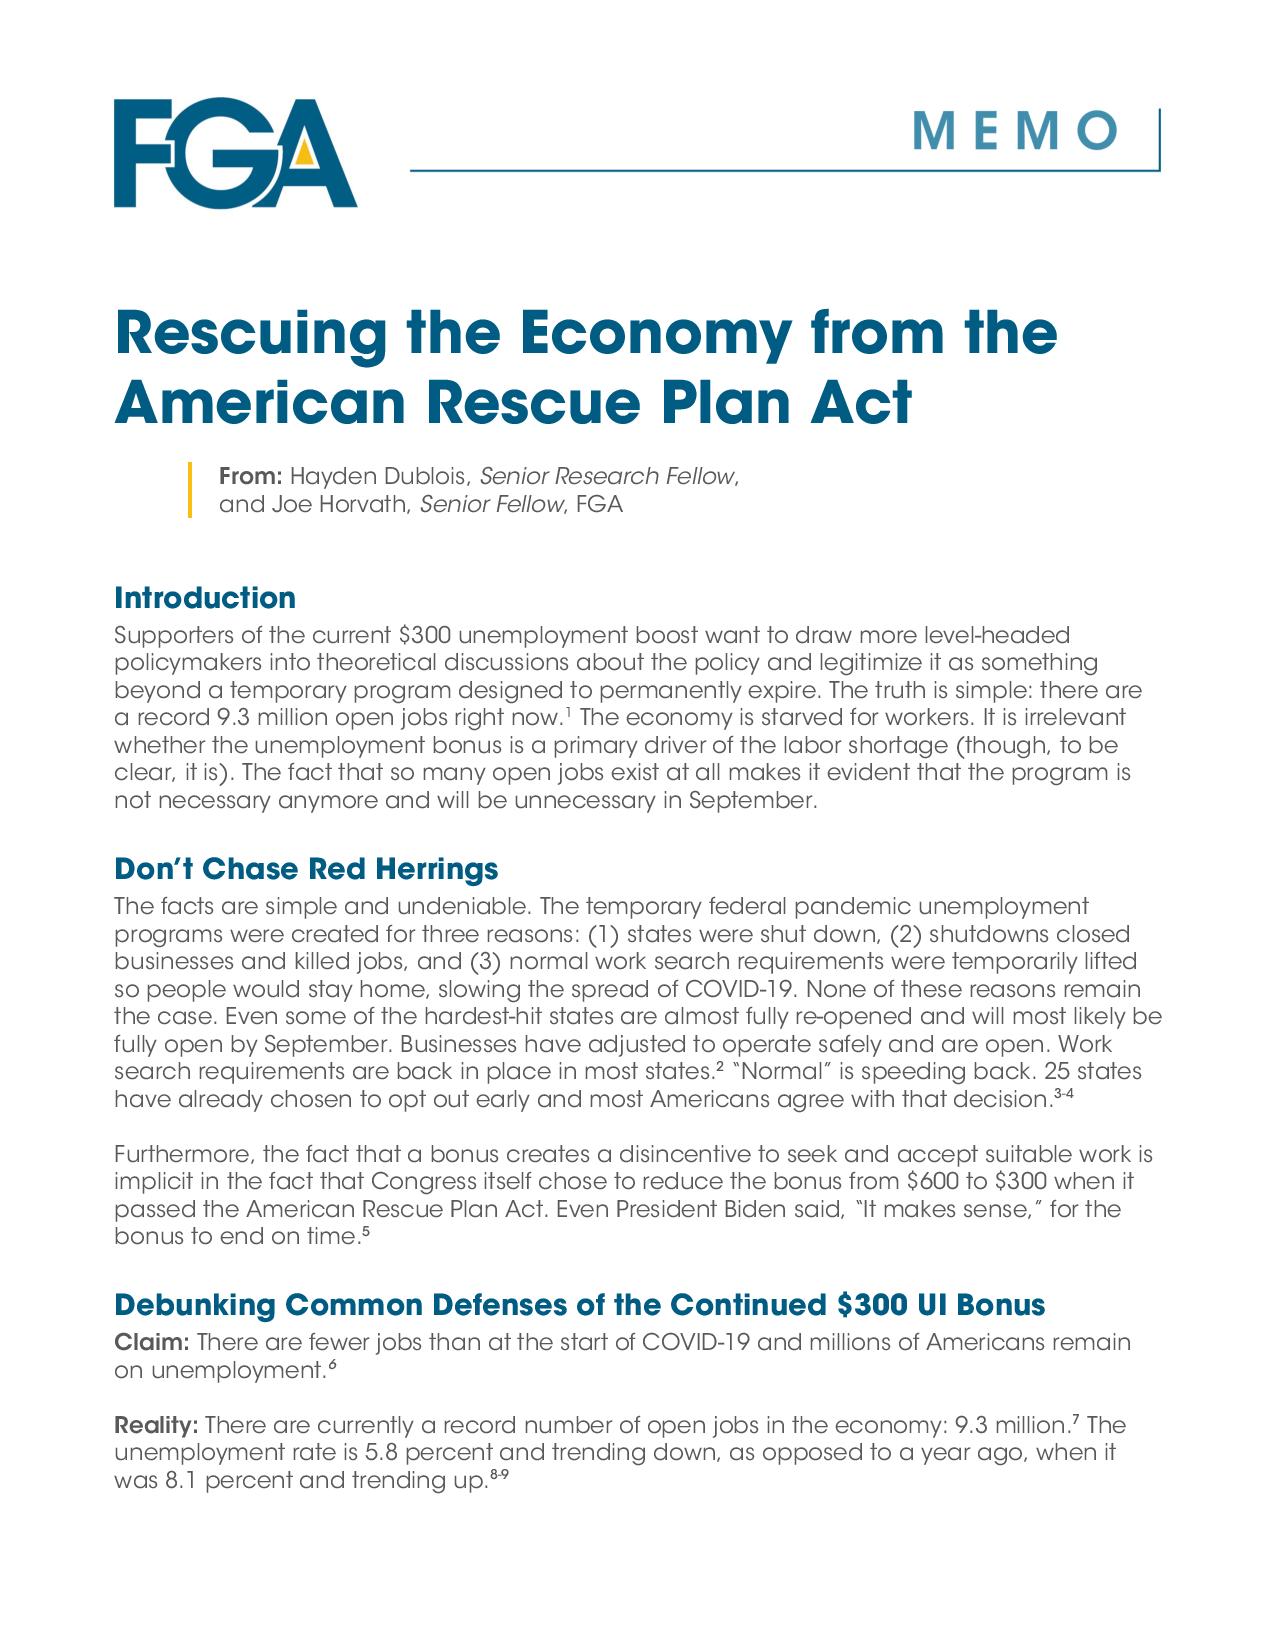 Rescuing the Economy from the American Rescue Plan Act